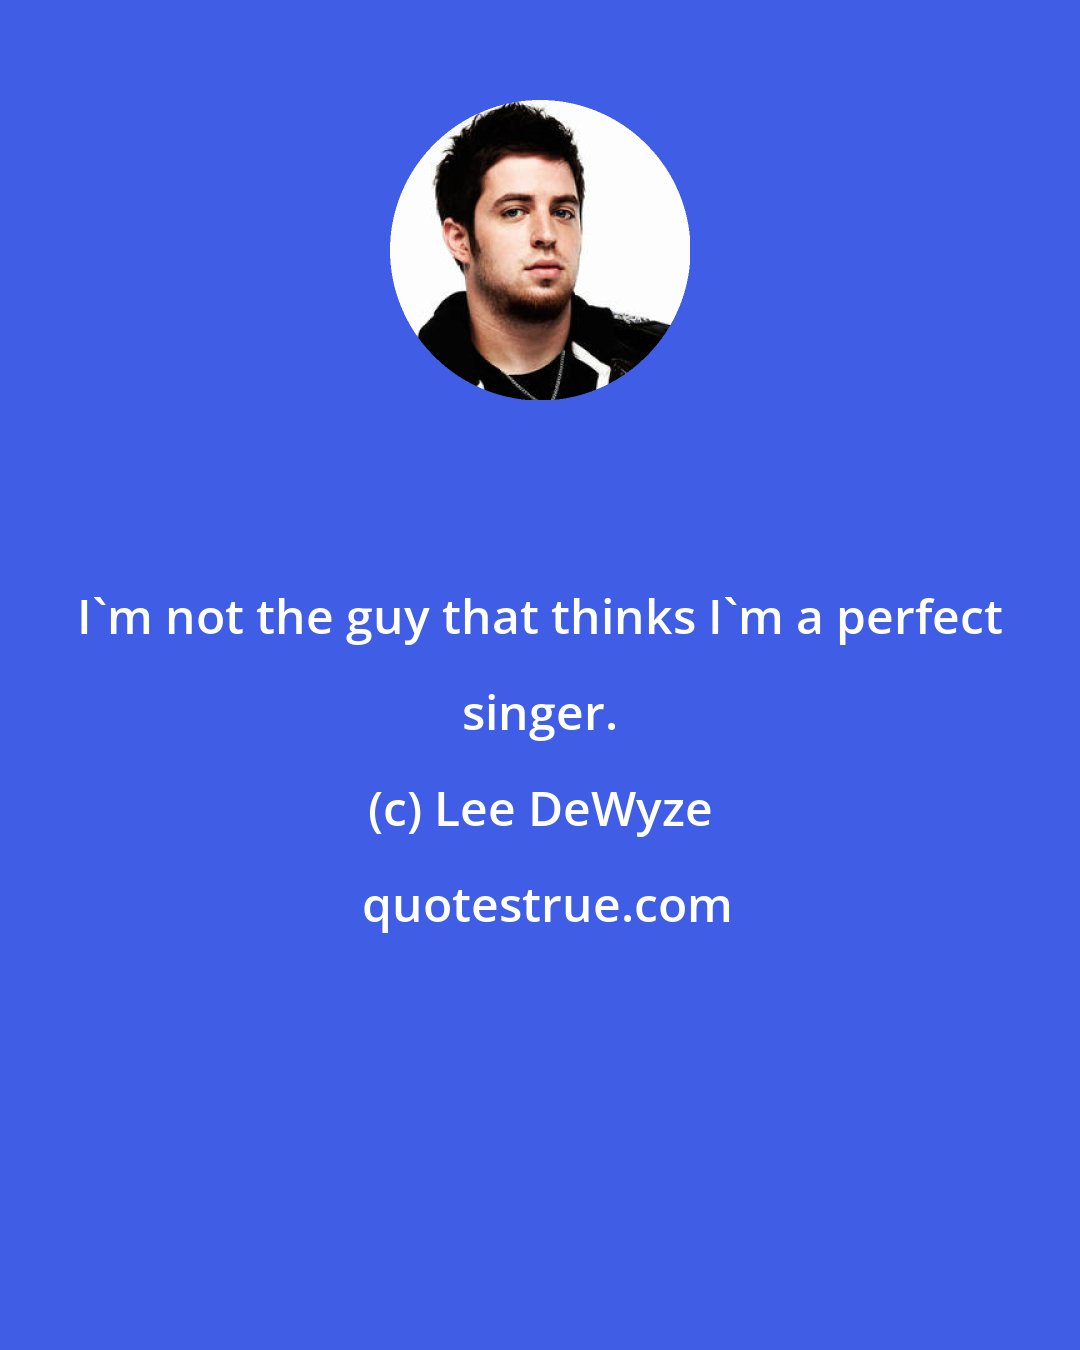 Lee DeWyze: I'm not the guy that thinks I'm a perfect singer.